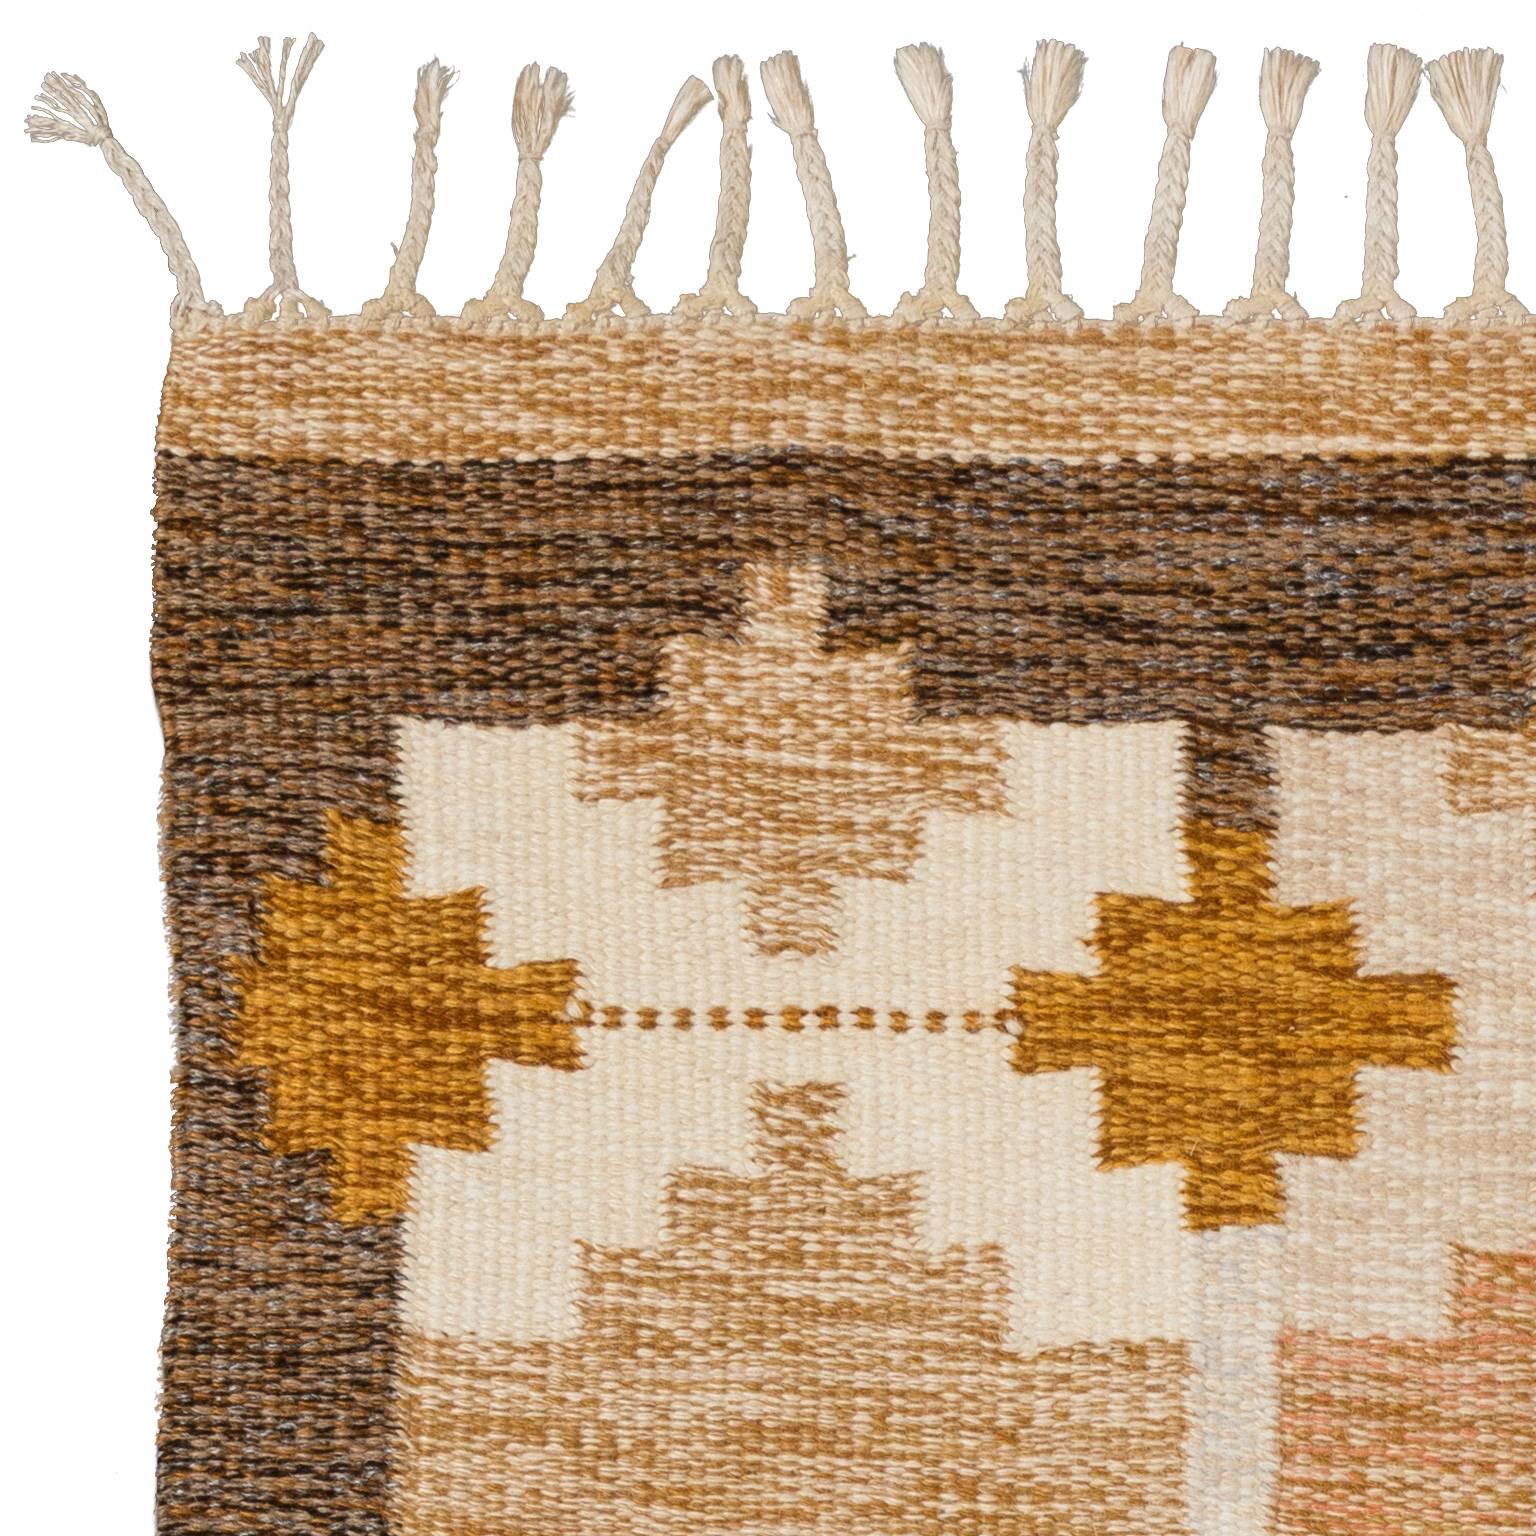 This rug is all about a warm and sunny feelings. Woven circa 1960s with a distinctive color palette in warm yellow, brown-yellow and purple. Handwoven rare pattern designed and signed IS, famous Swedish designer Ingegerd Silow. She was one of the